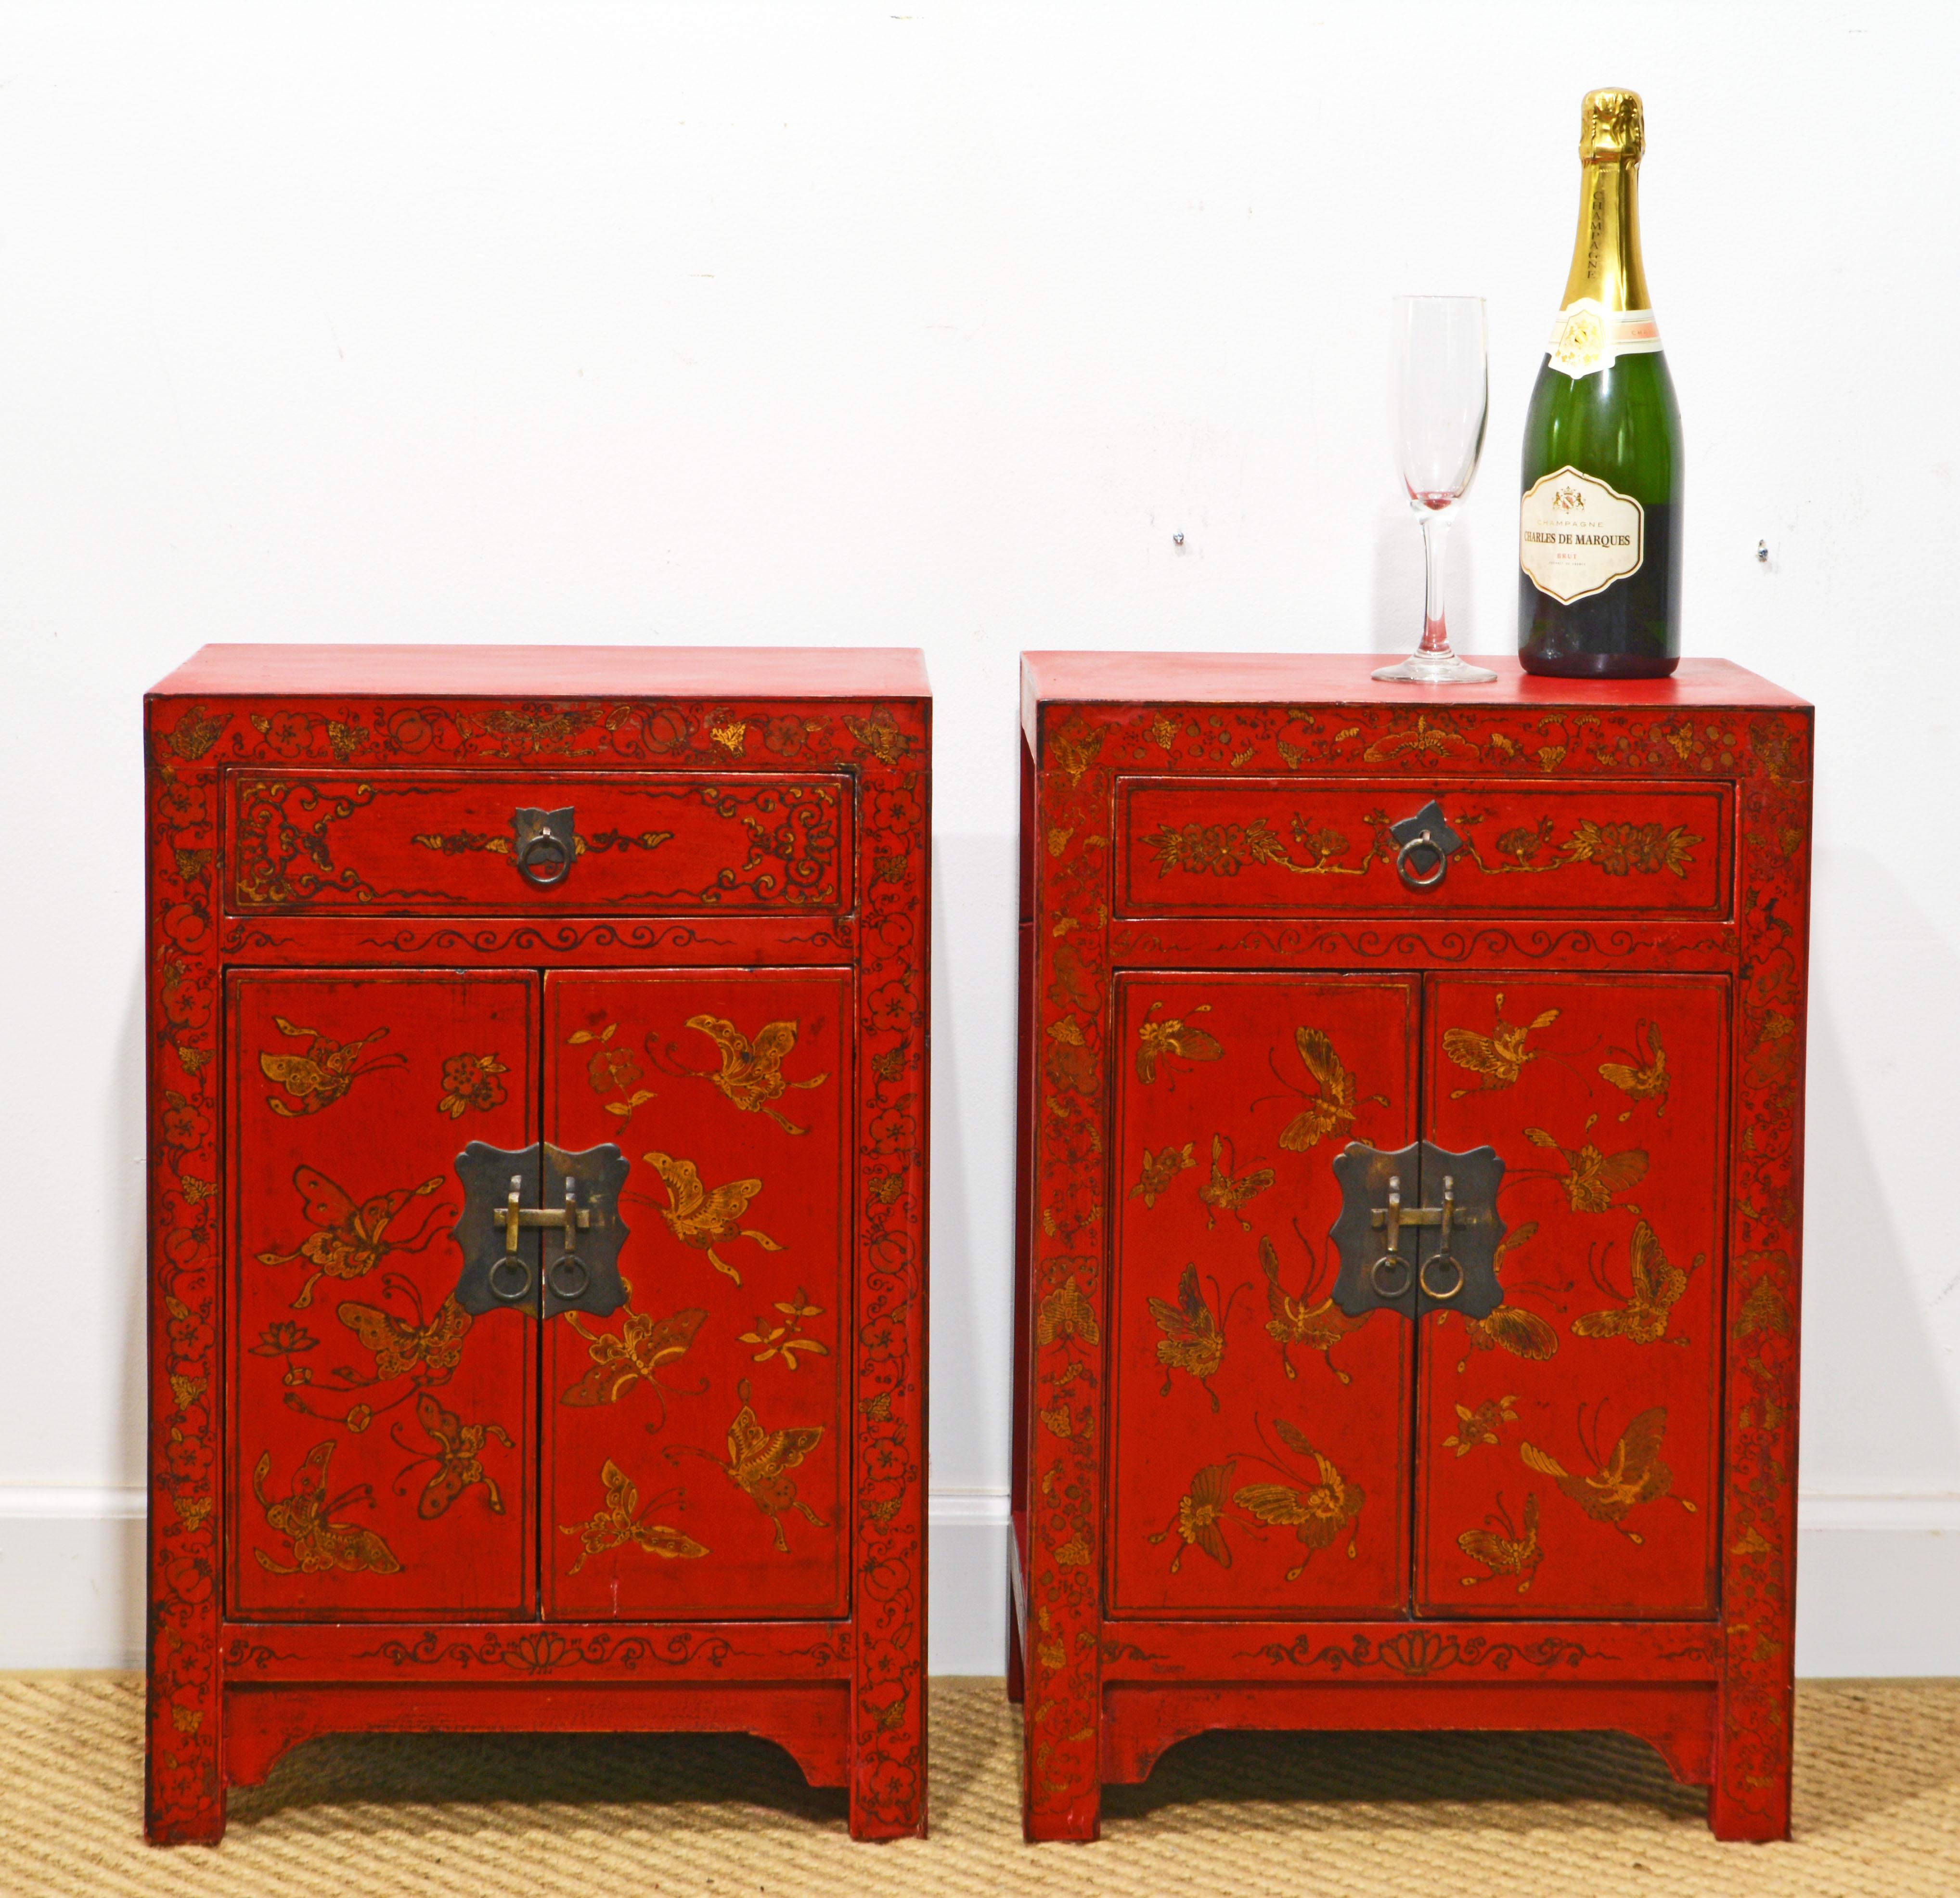 Gilt Pair of Vintage Chinese Lacquered Butterfly Decorated Night Stands or End Tables